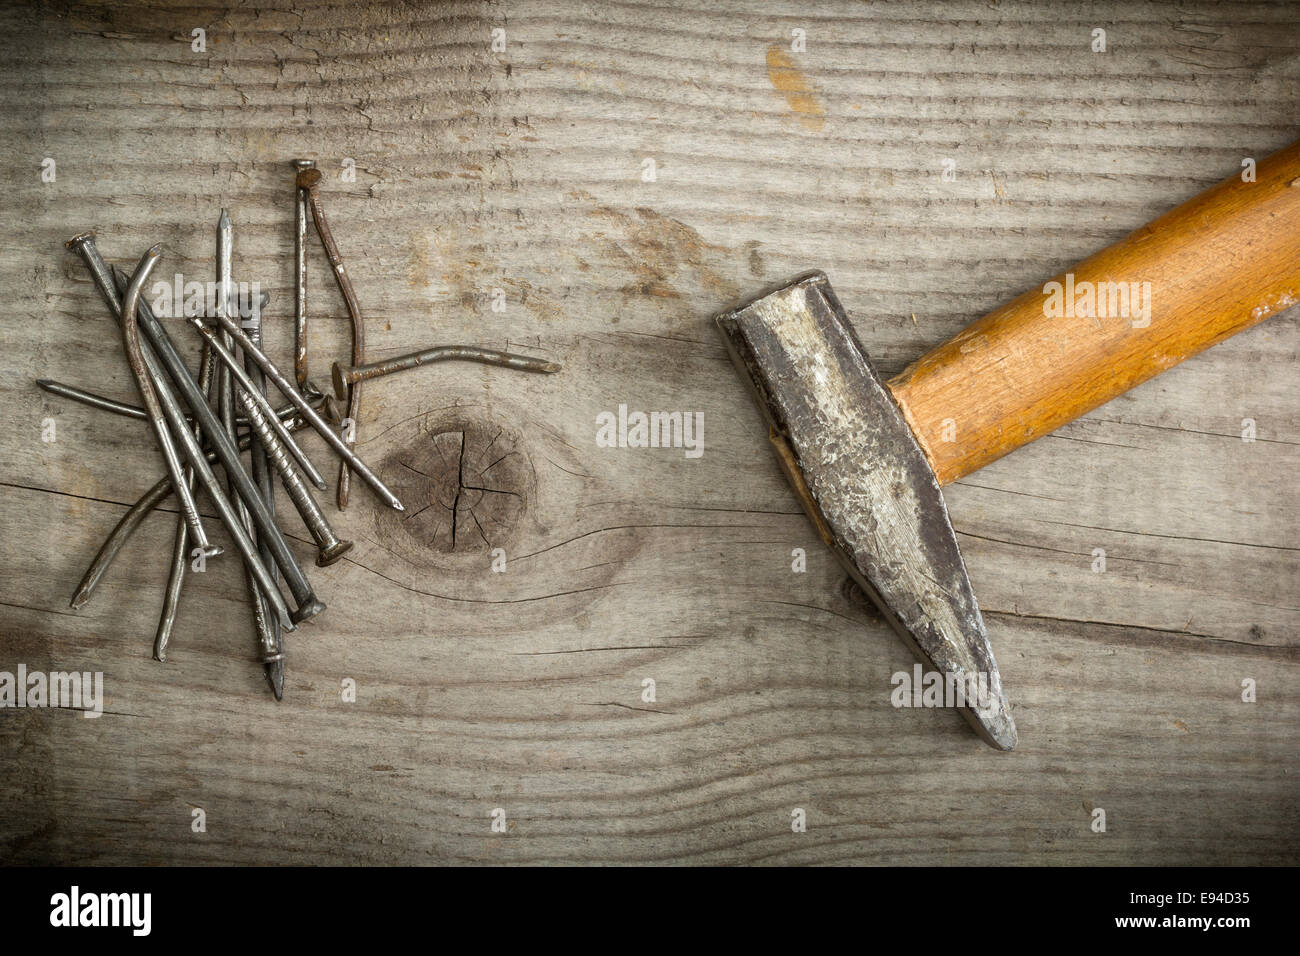 Old rusty nails and hammer on wooden background Stock Photo